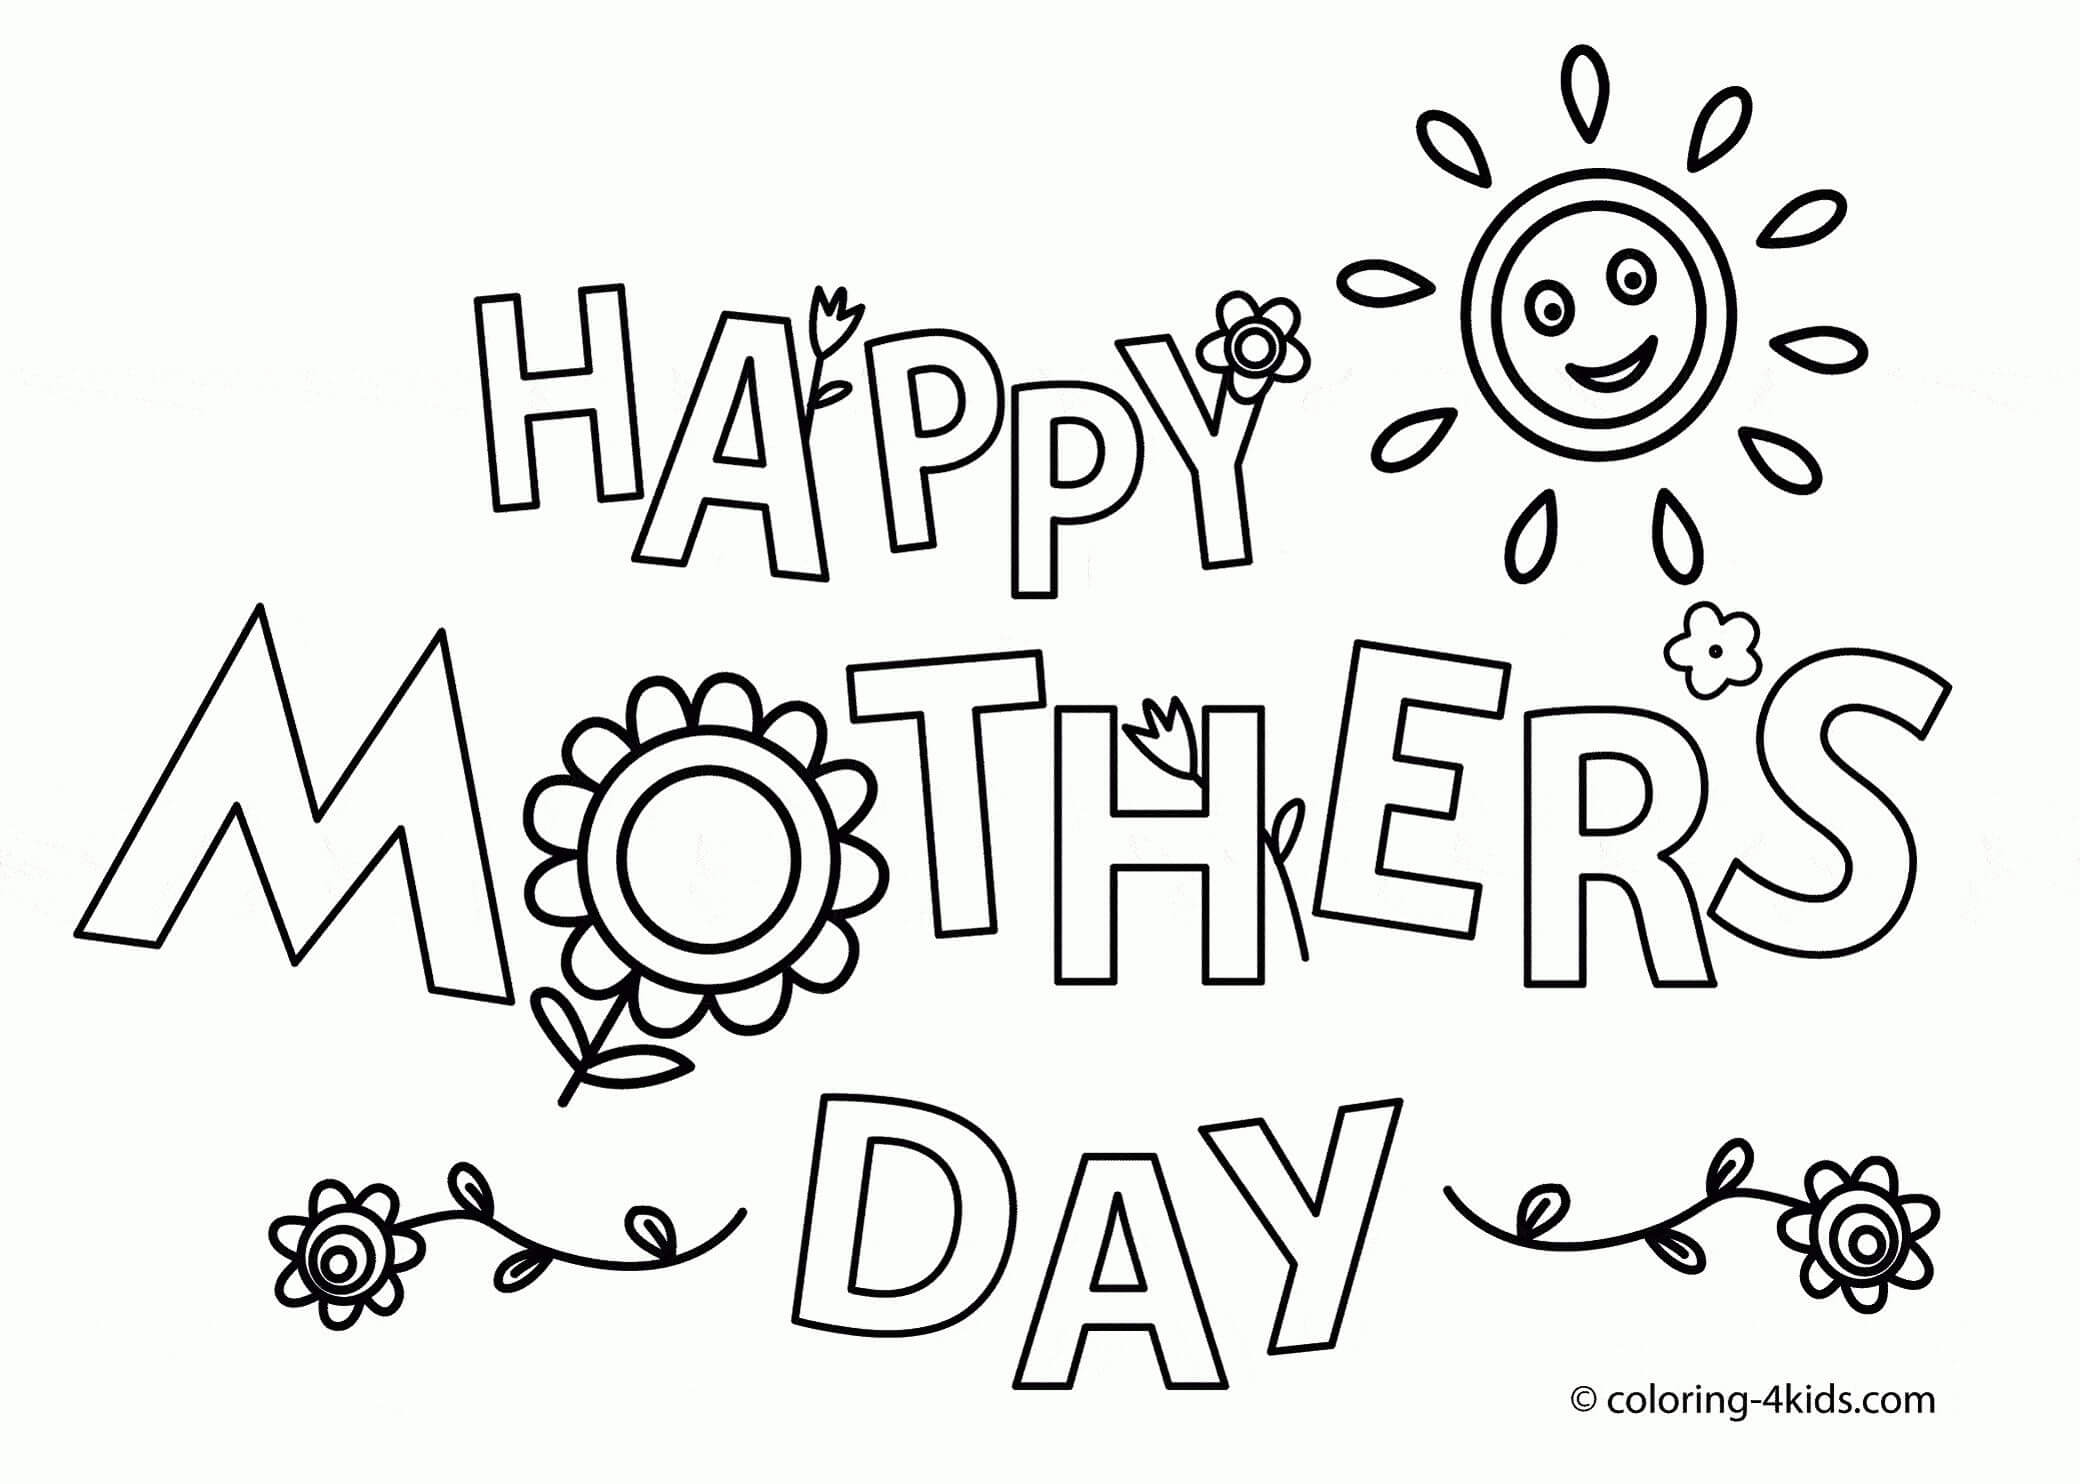 123-free-printable-mother-s-day-cards